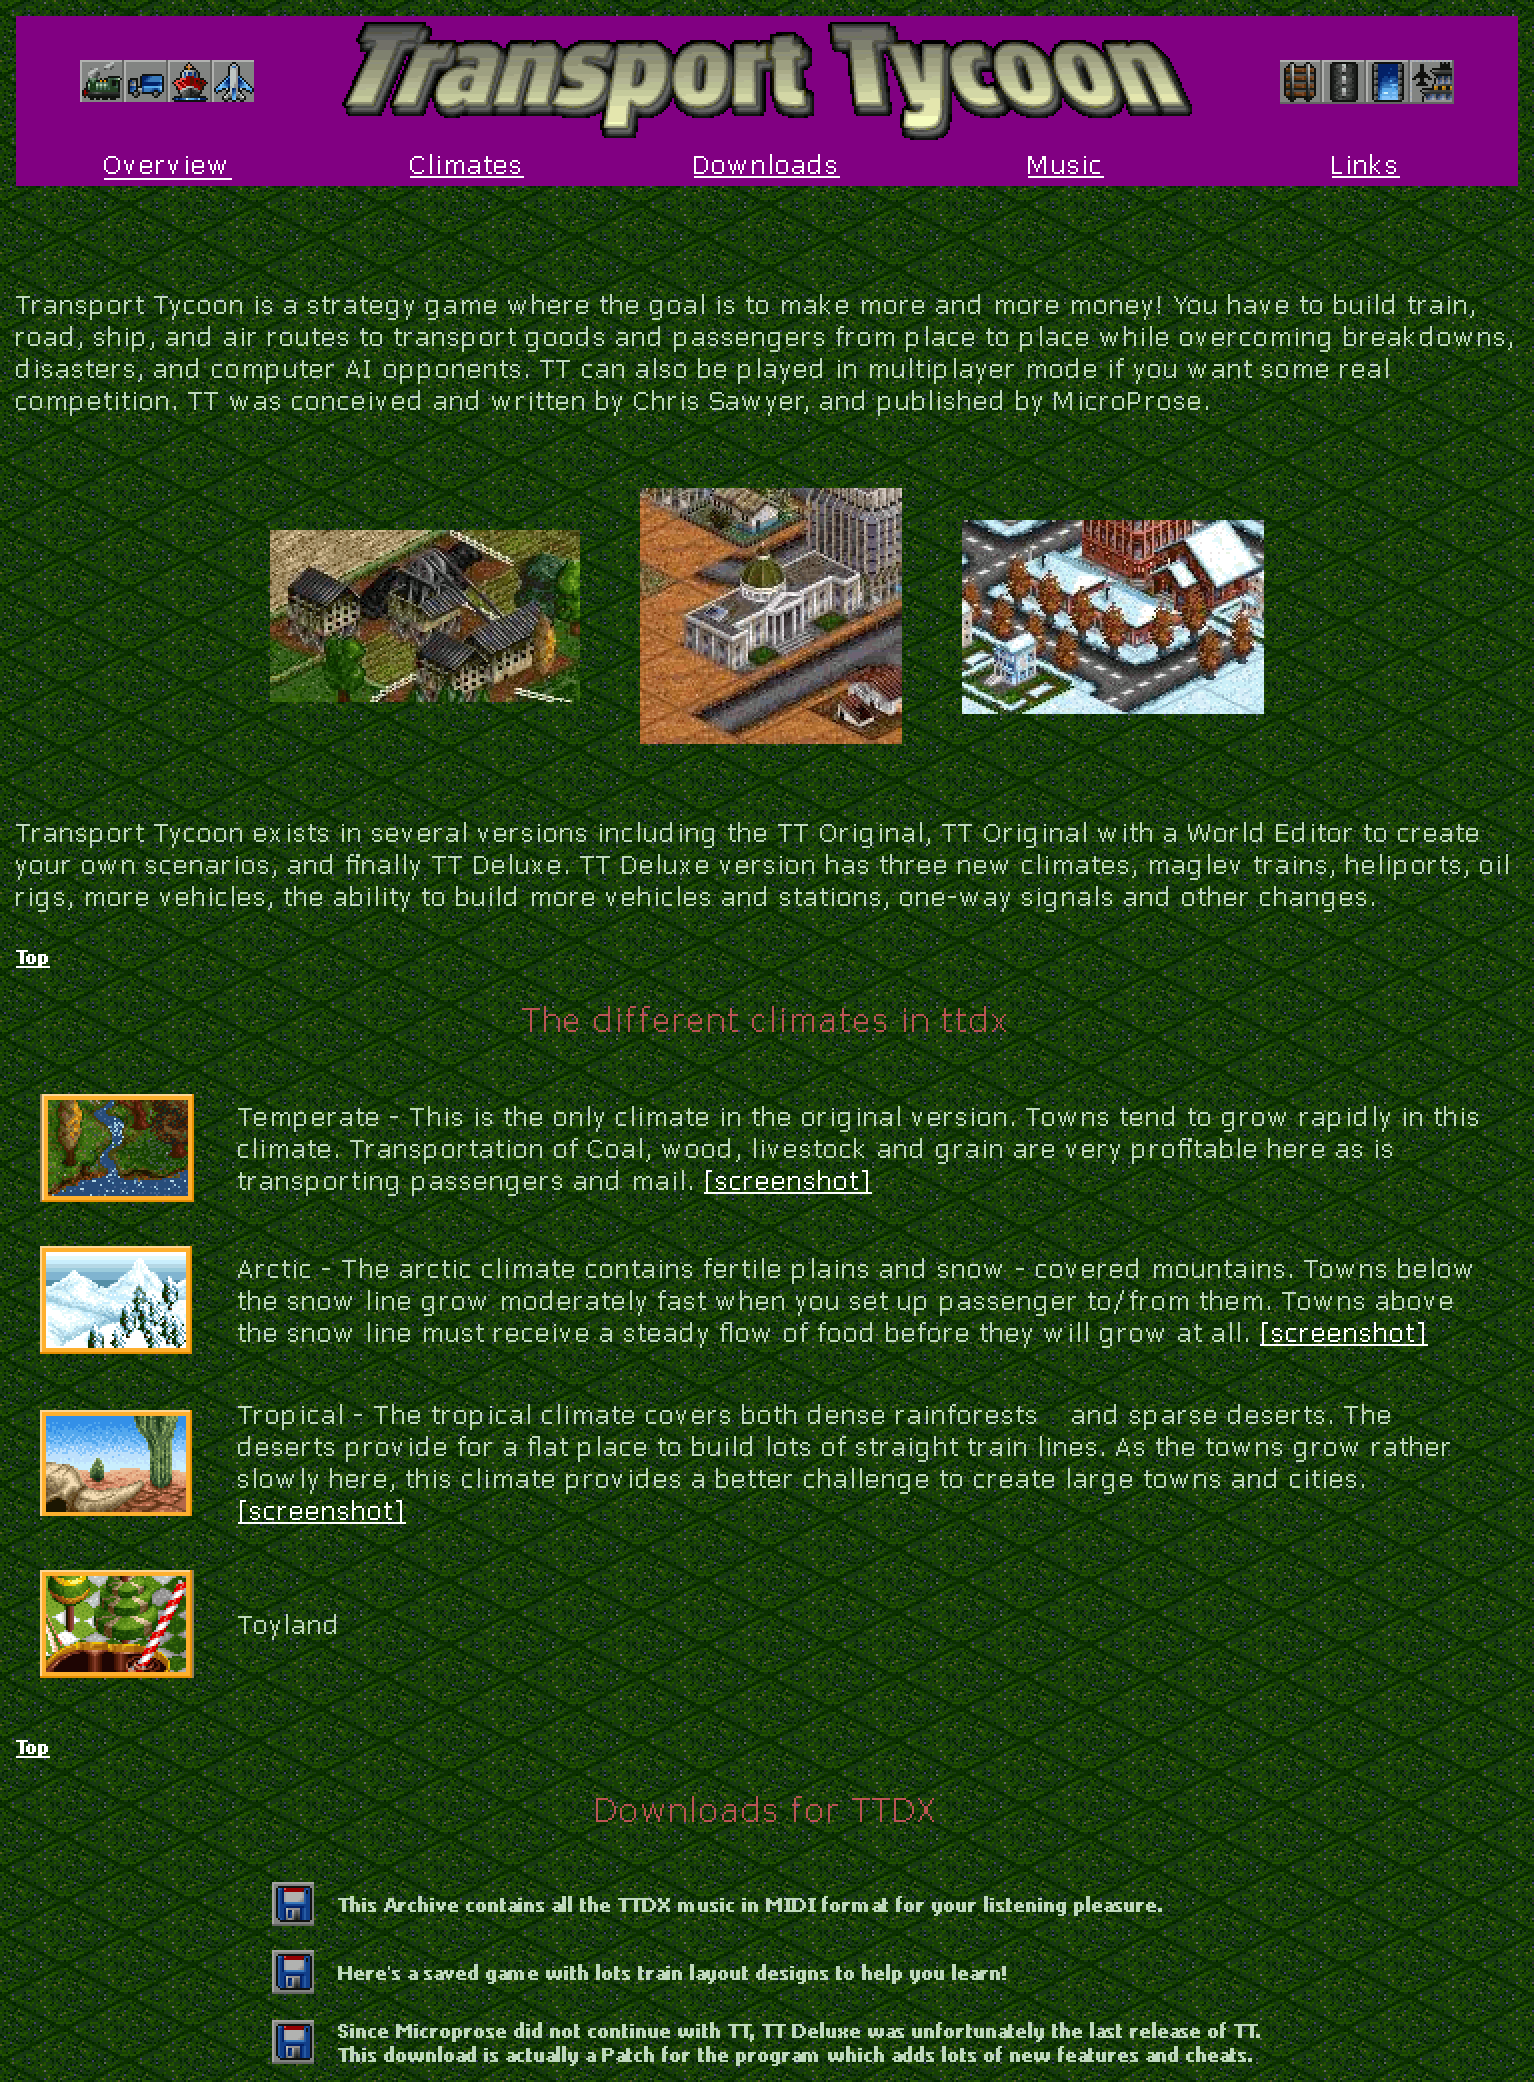 a screenshot of an old website about the game Transport Tycoon Deluxe. It has a tiled green pixelated background, a vivid purple header and is full of questionable design decisions.